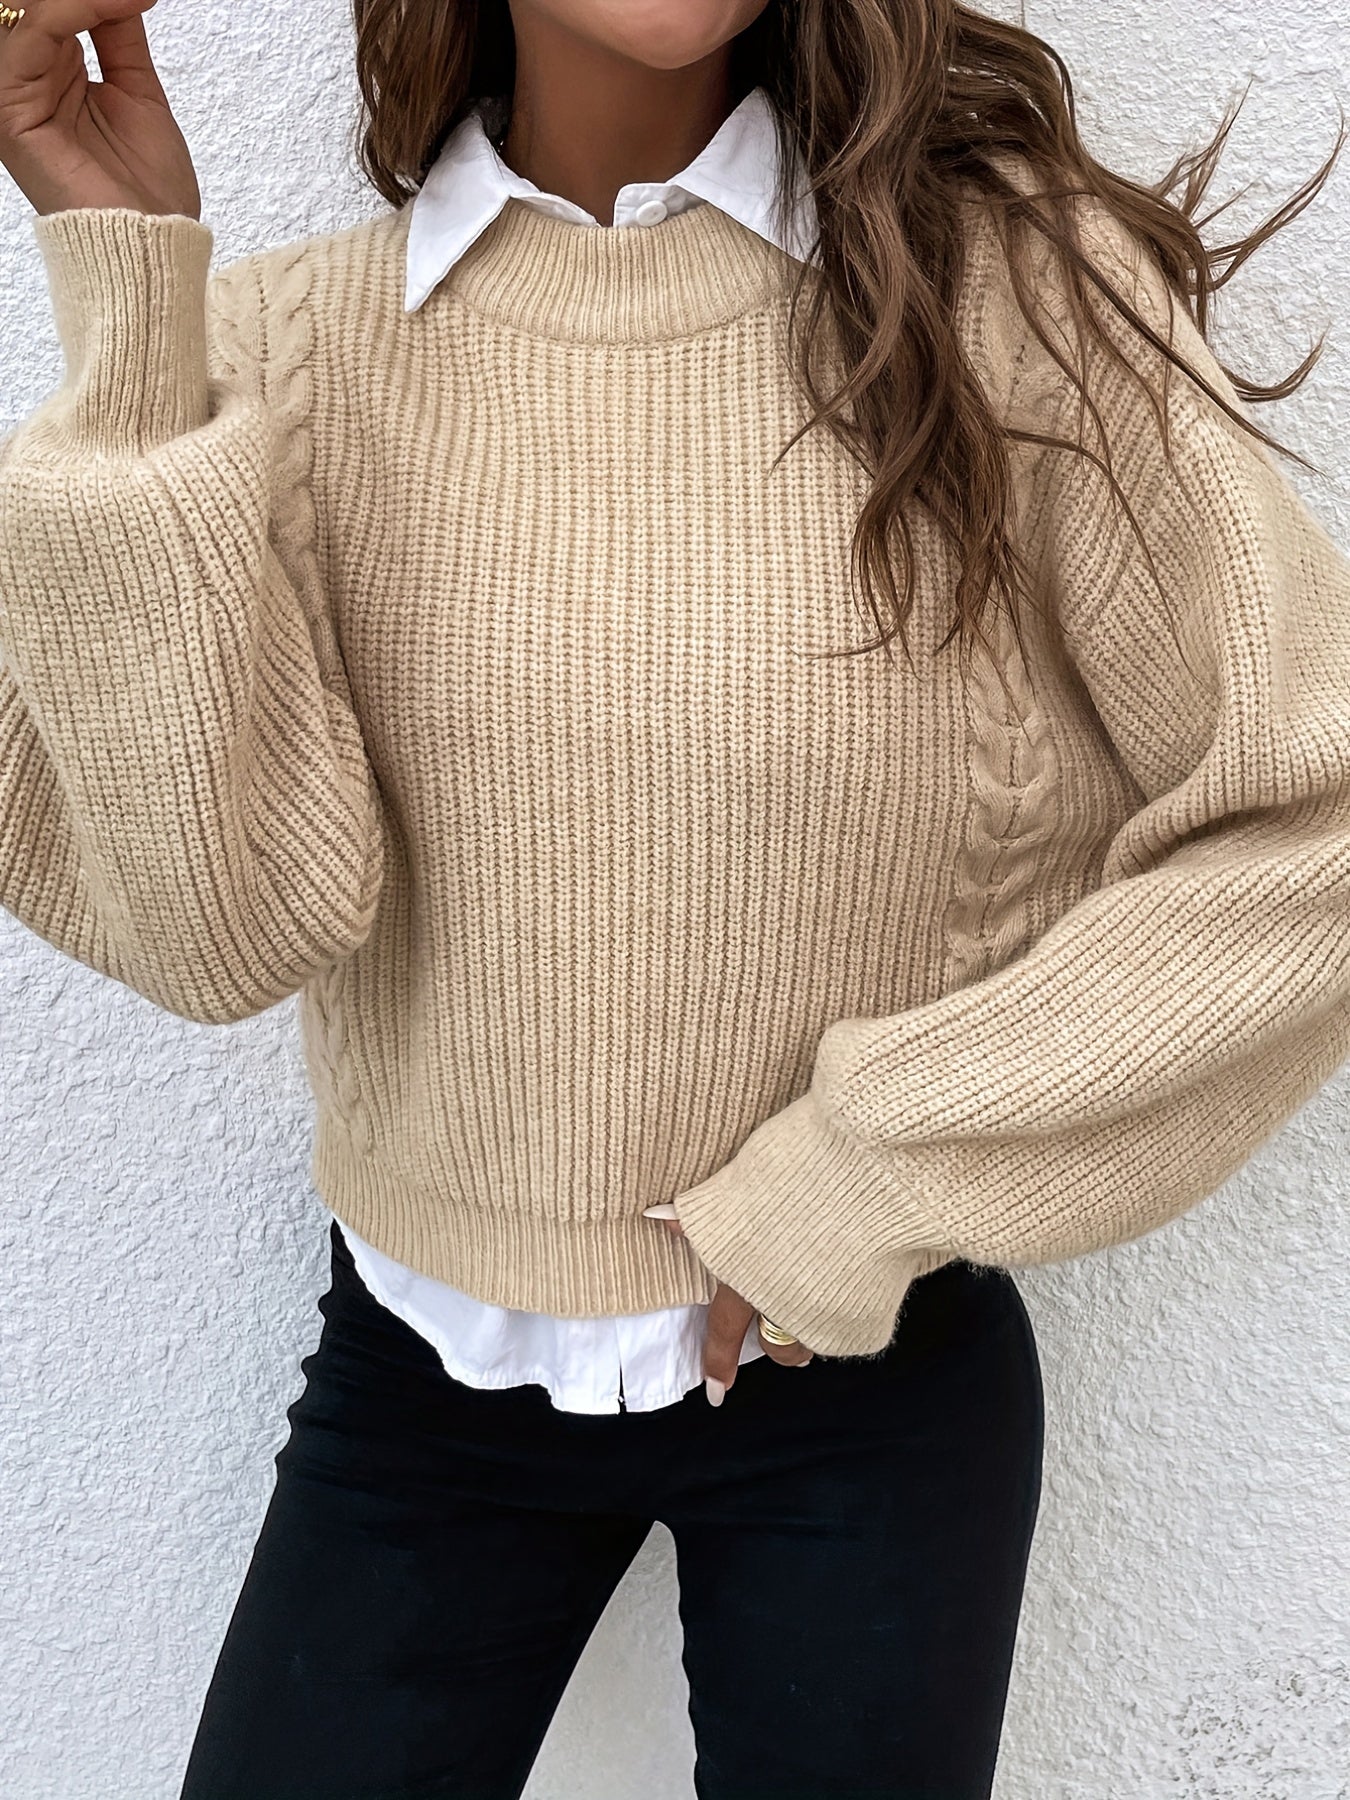 Antmvs Solid Crew Neck Pullover Sweater, Casual Long Sleeve Sweater For Fall & Winter, Women's Clothing